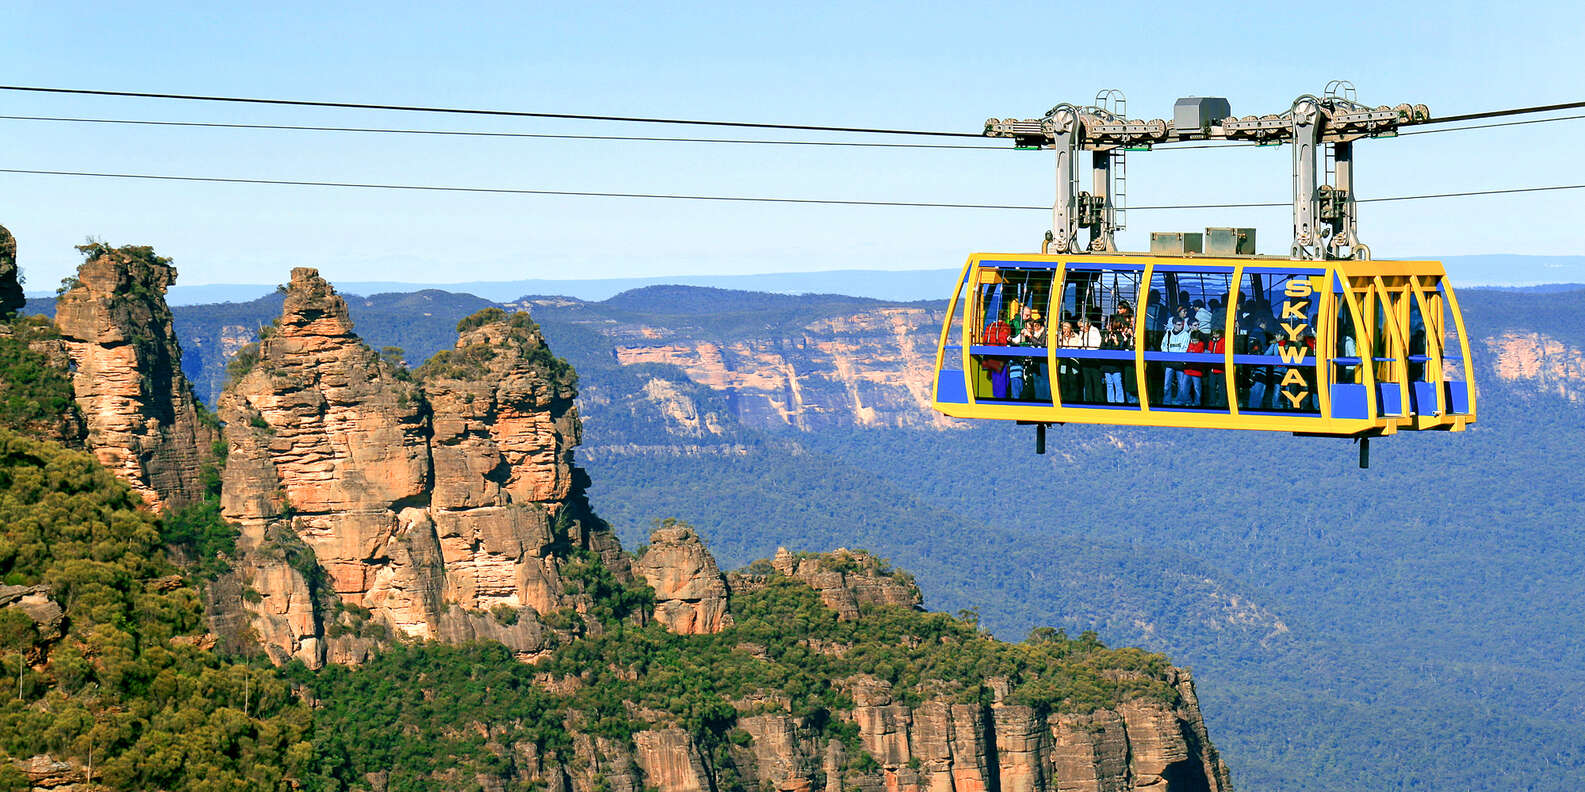 What to do in Katoomba